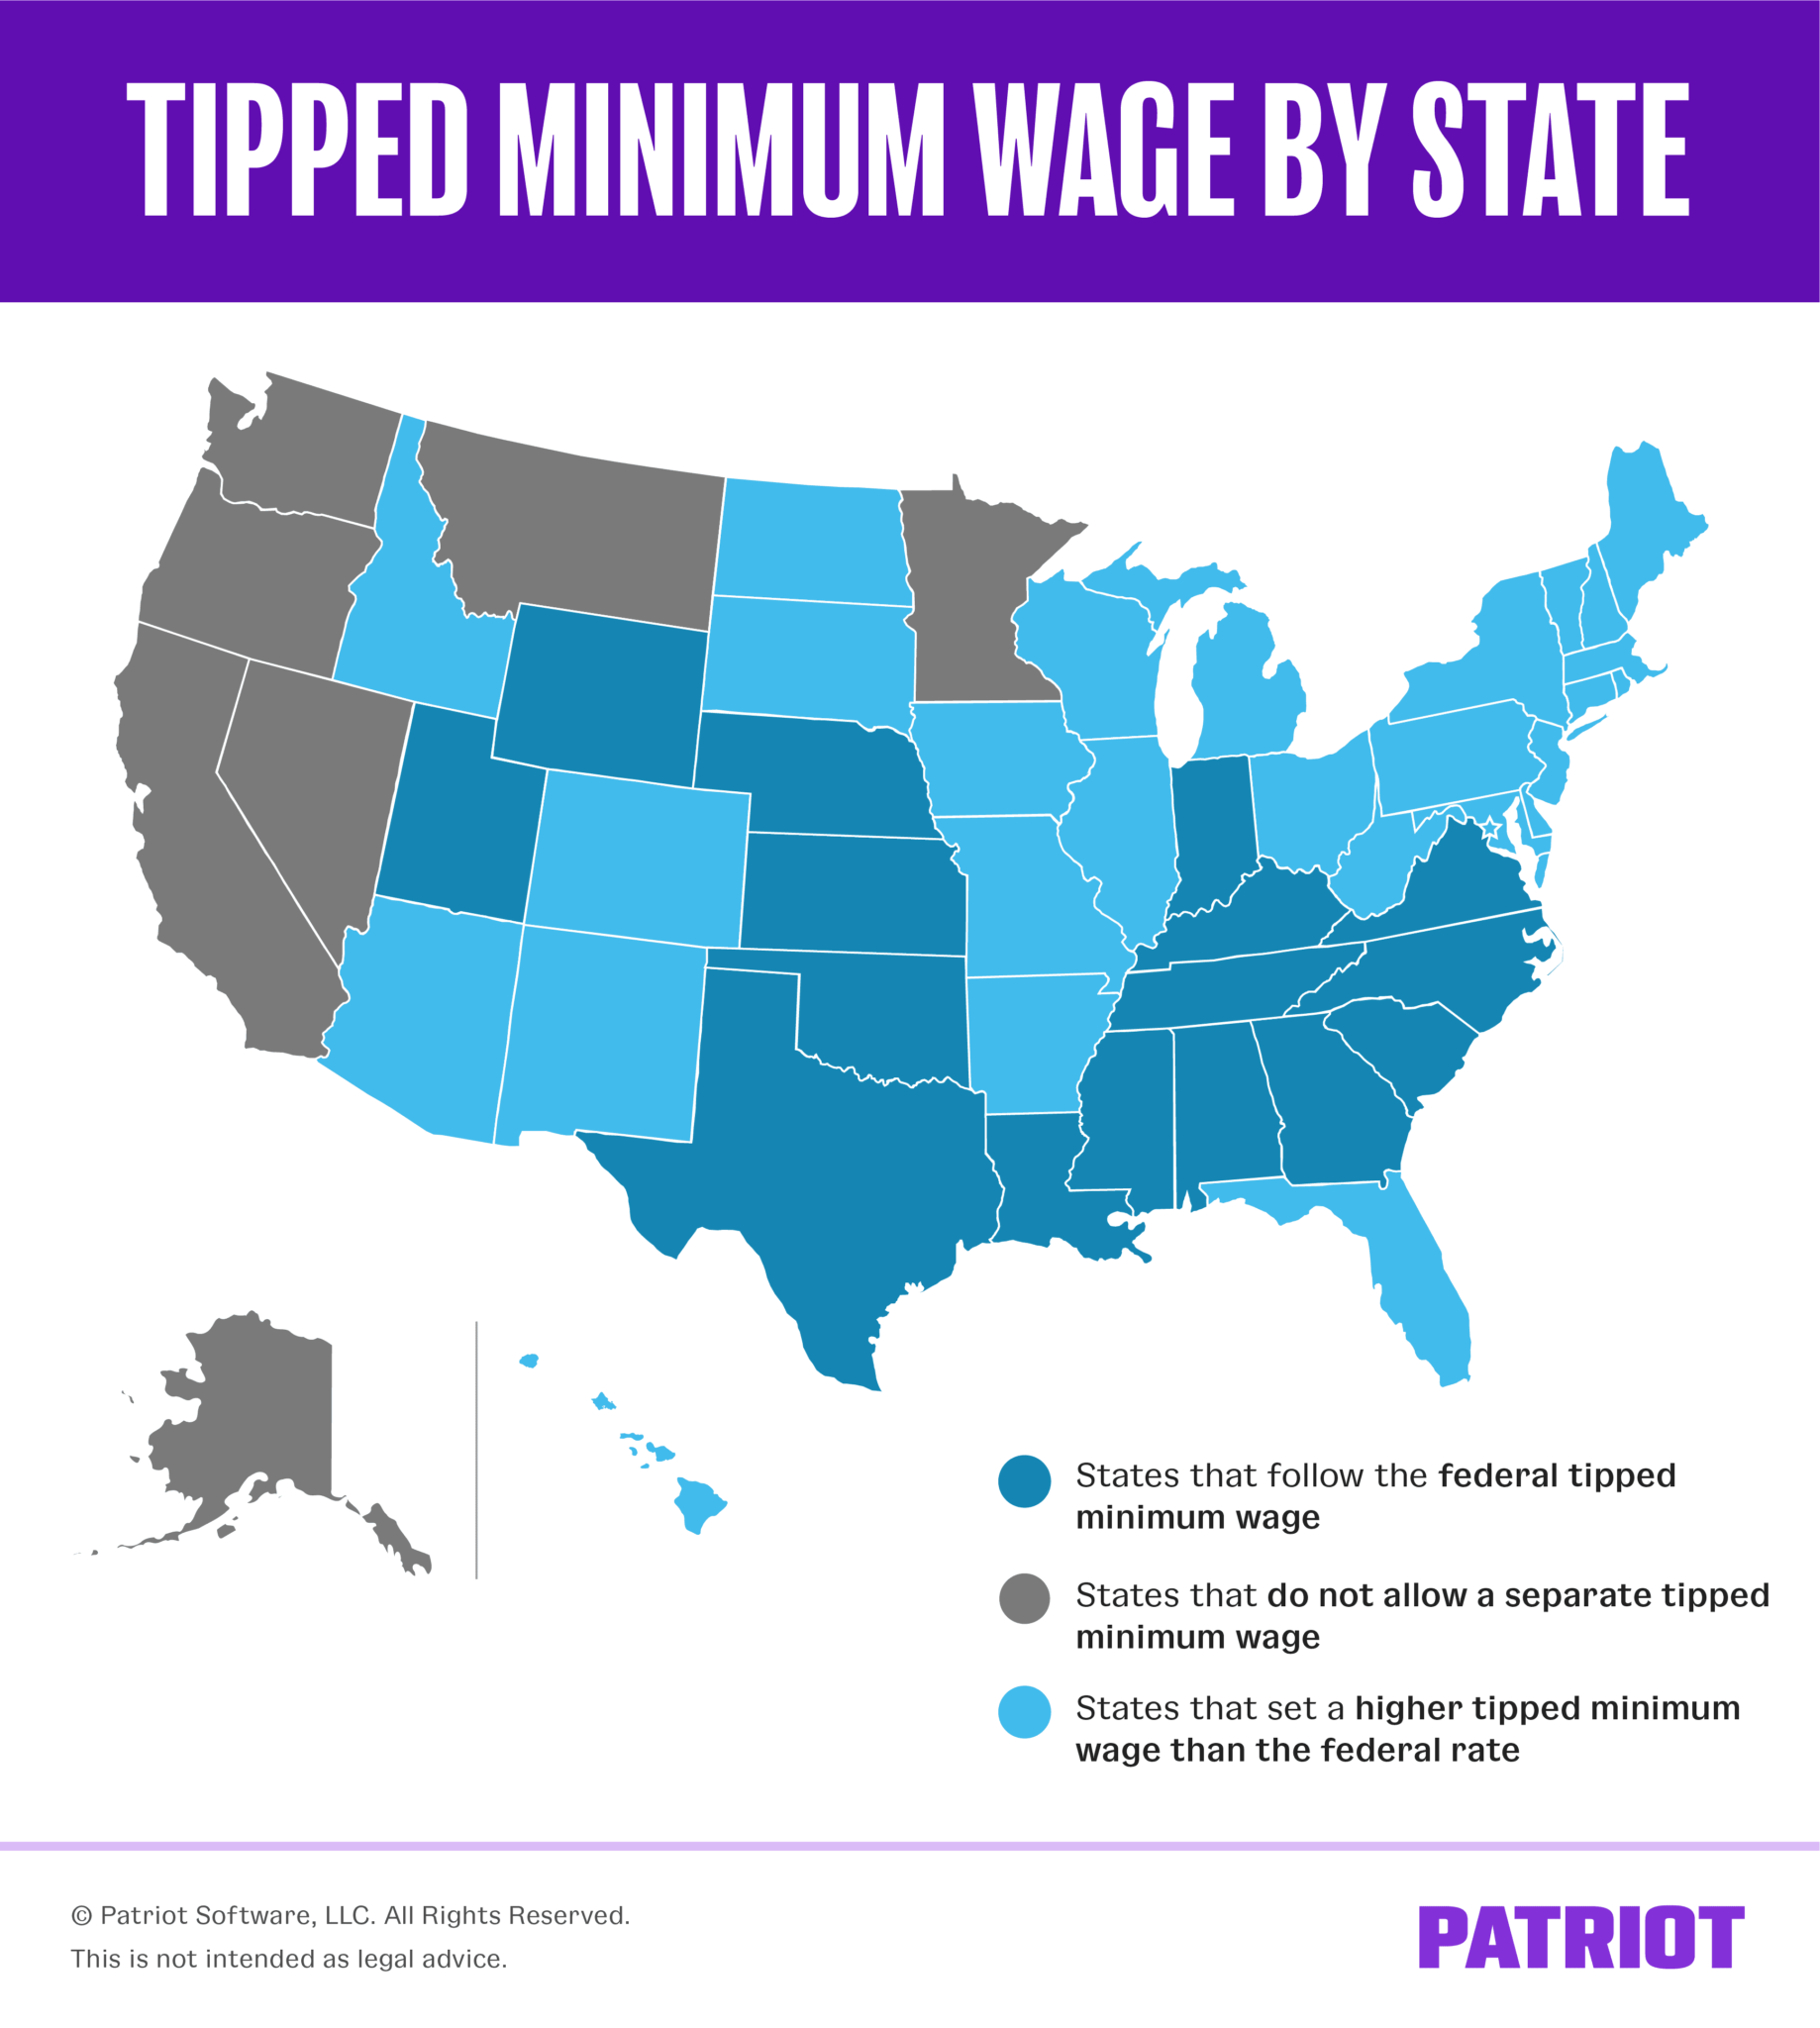 Tipped Minimum Wage Federal Rate and Rates by State (Chart)